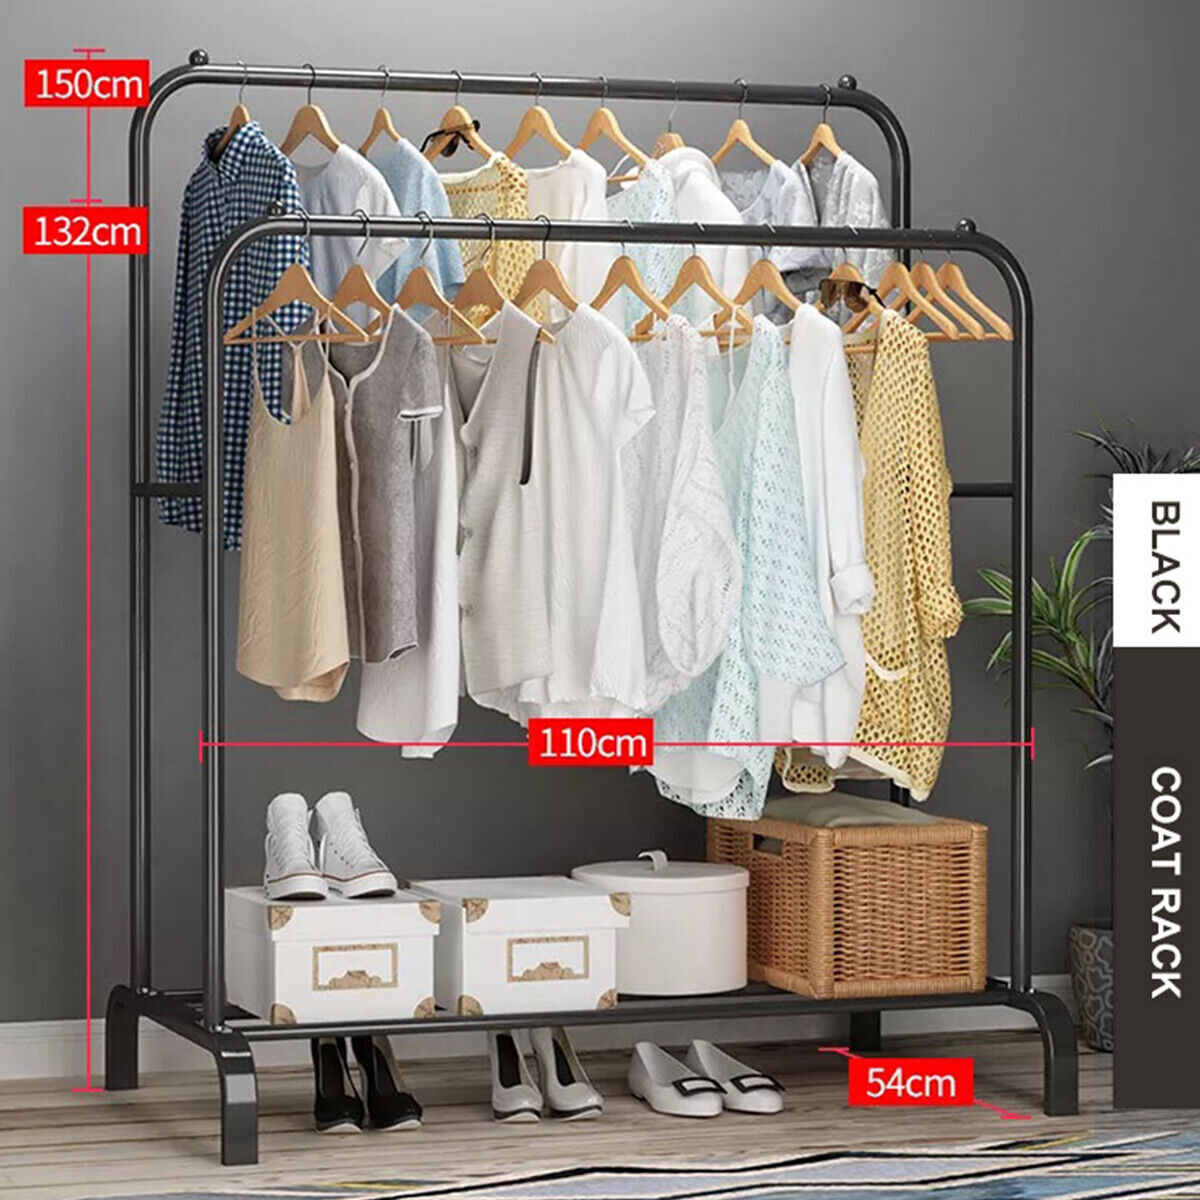 Double Clothes Rail Hanging Rack Garment Display Stand Storage Shelf